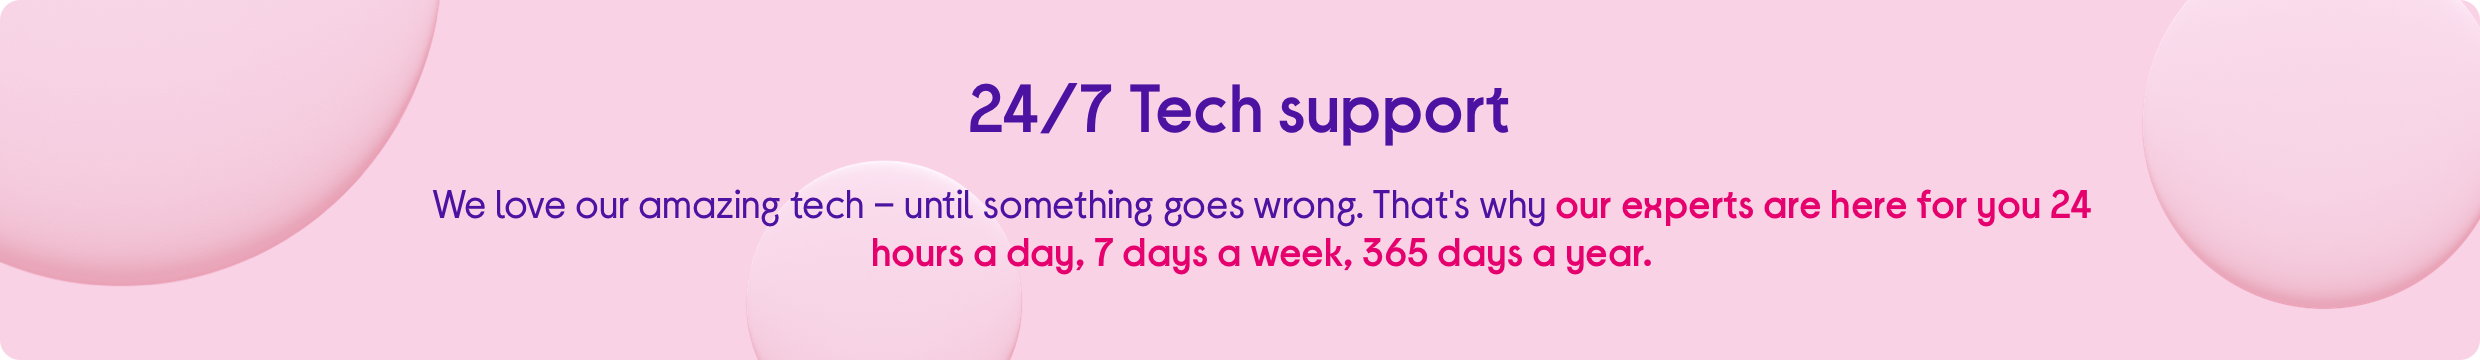 We love our amazing tech – until something goes wrong. That's why our experts are here for you 24 hours a day, 7 days a week, 365 days a year. 